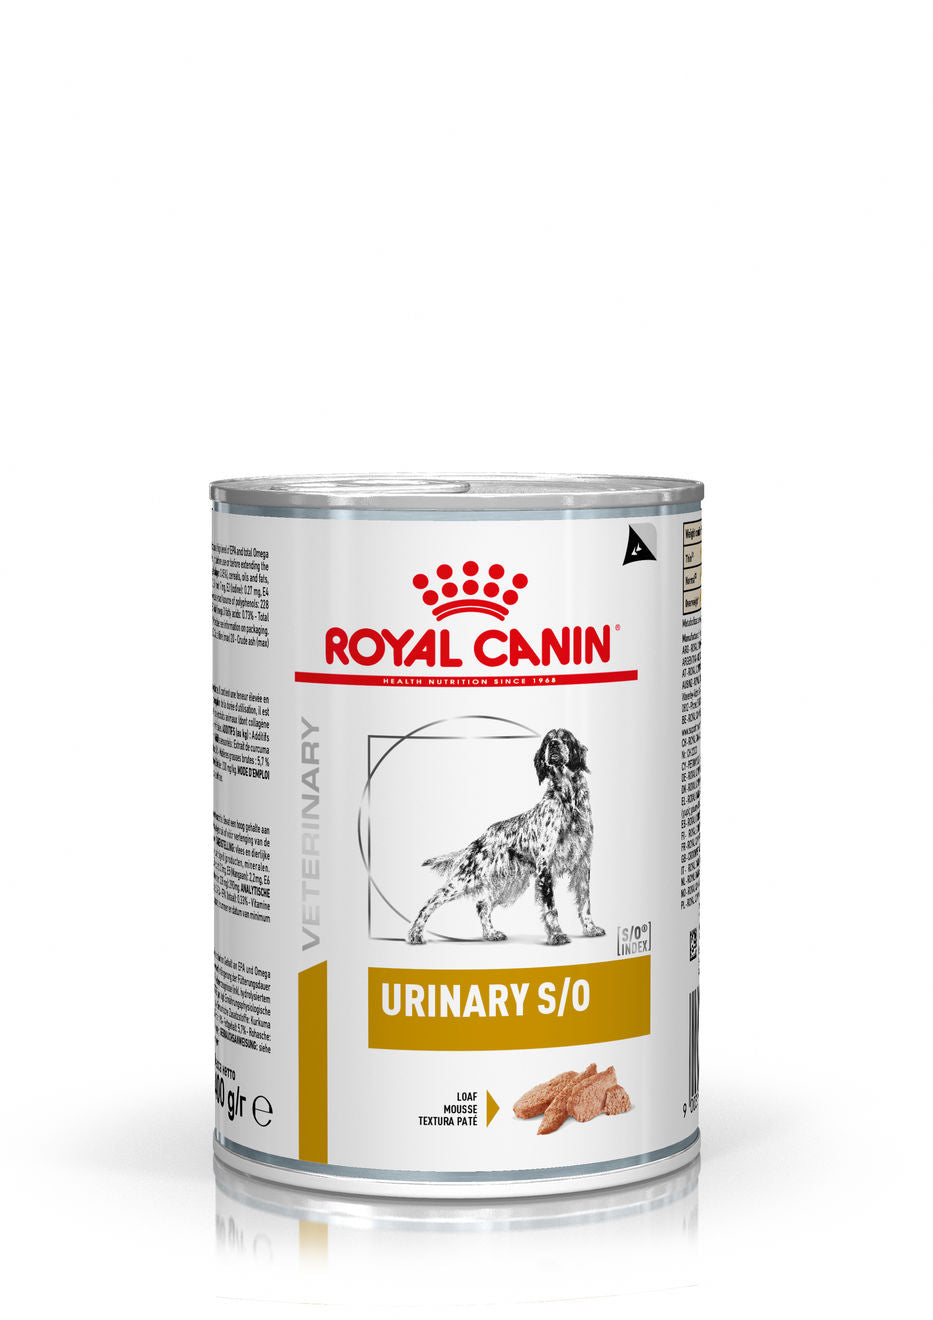 Royal Canin Urinary S/O for Dogs Canned